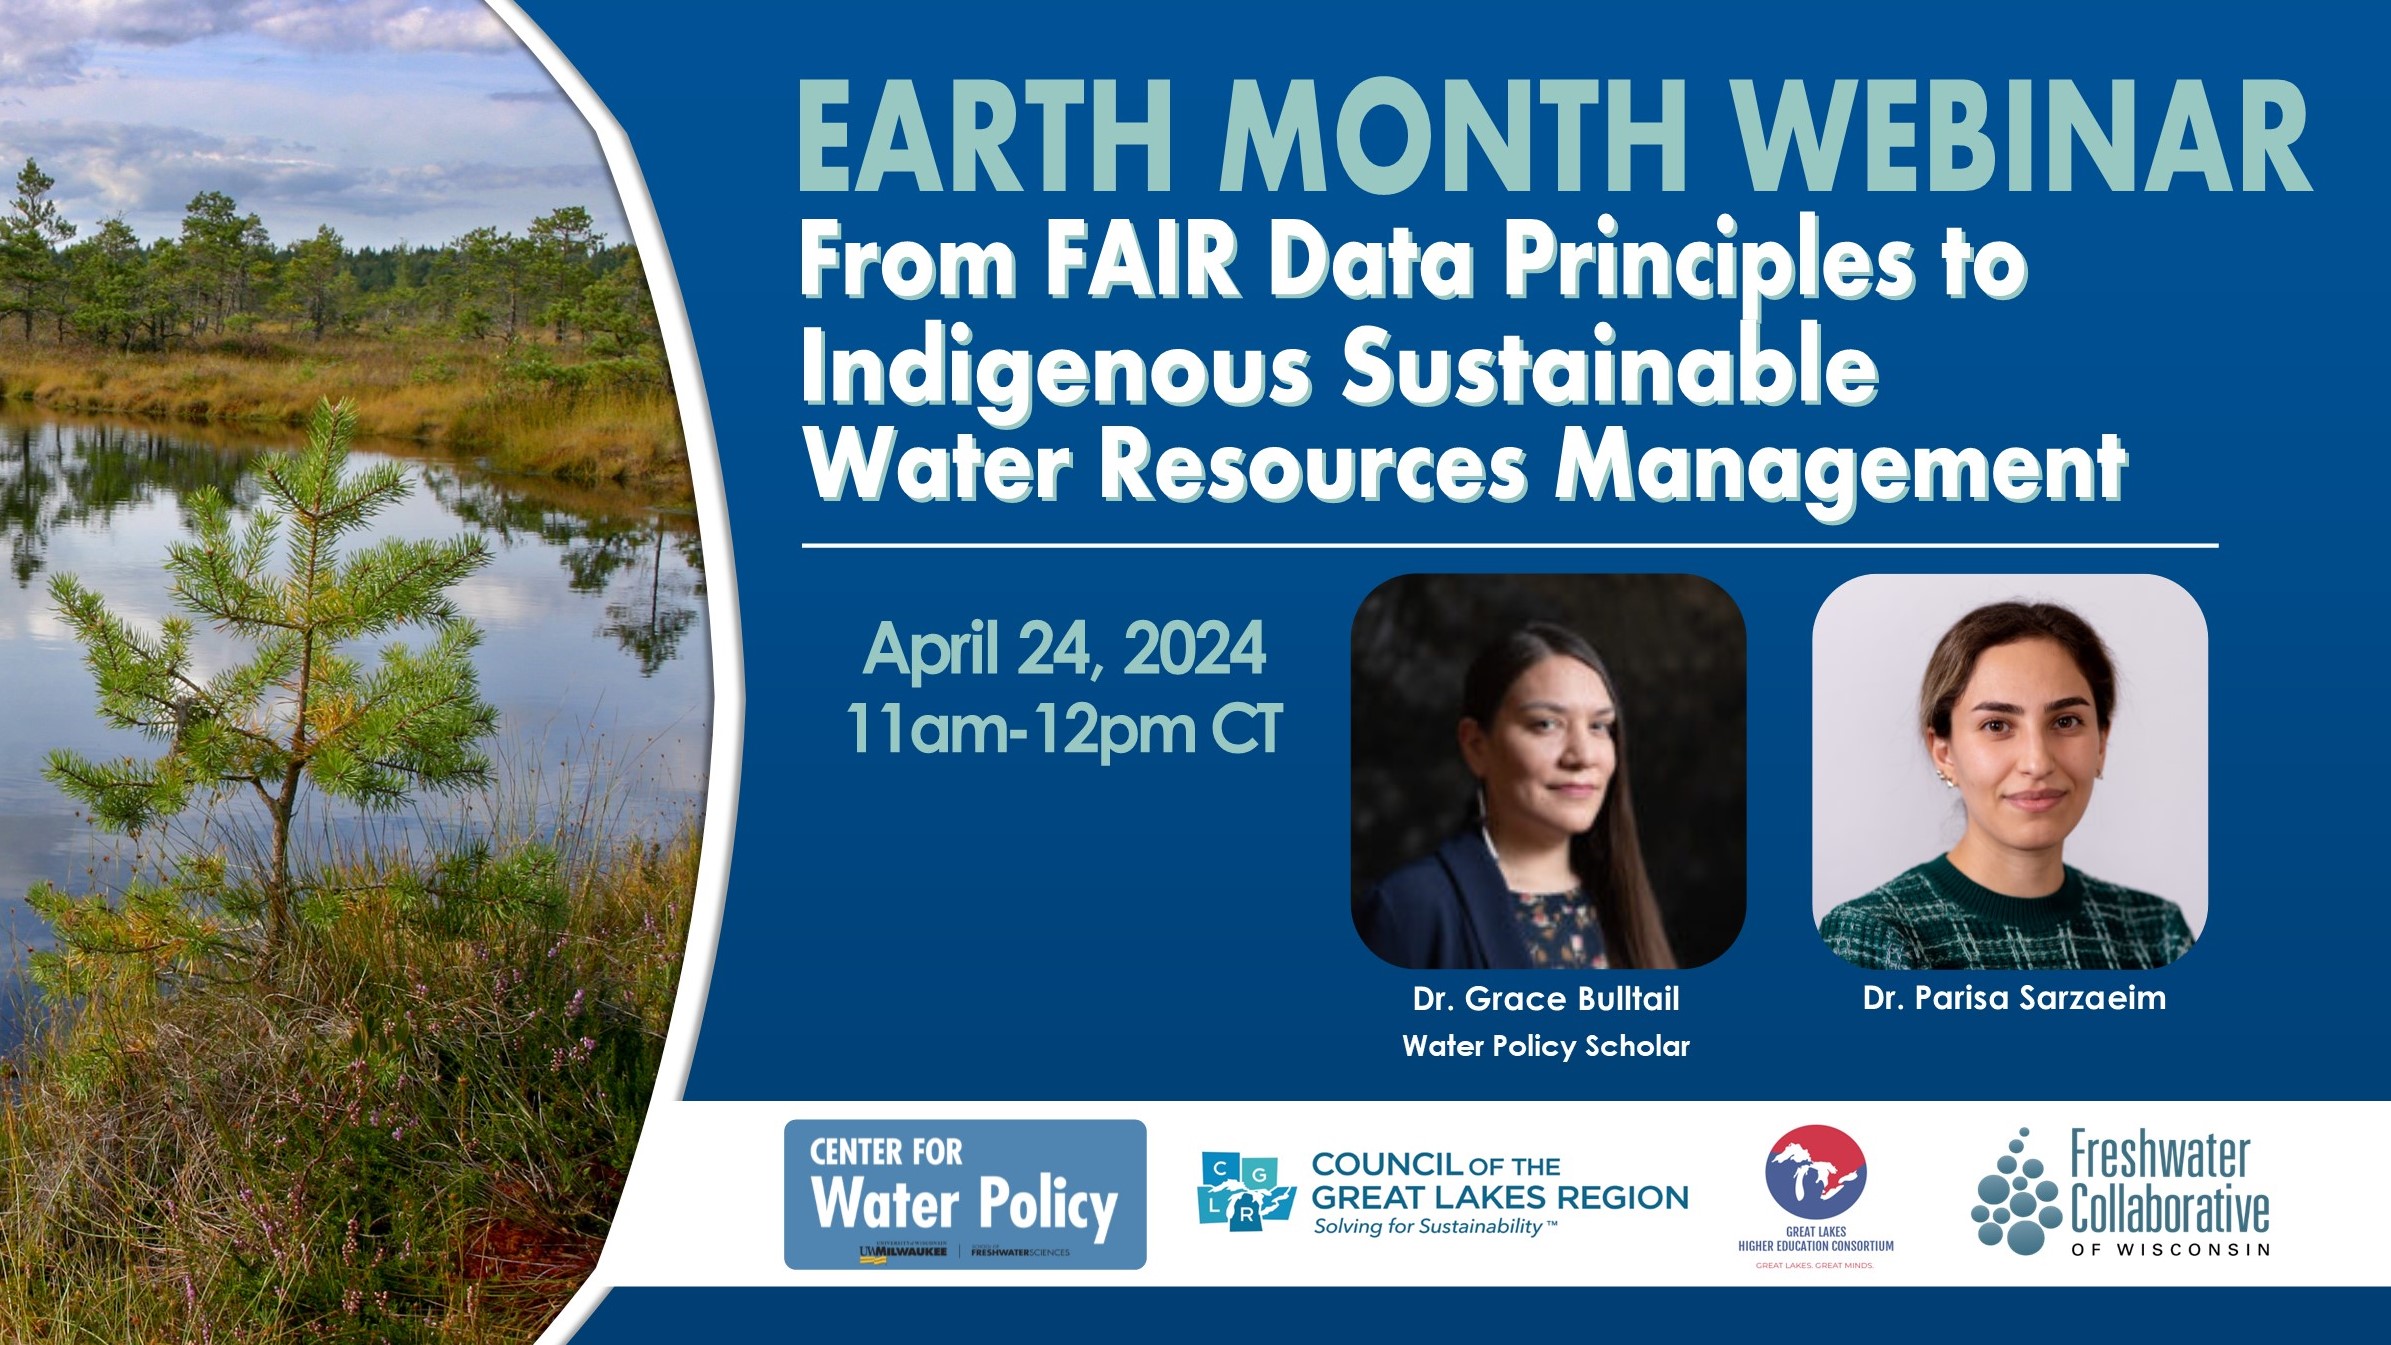 Center for Water Policy and Freshwater Collaborative of Wisconsin Hosted Earth Month Webinar – From FAIR Data Principles to Indigenous Sustainable Water Resources Management